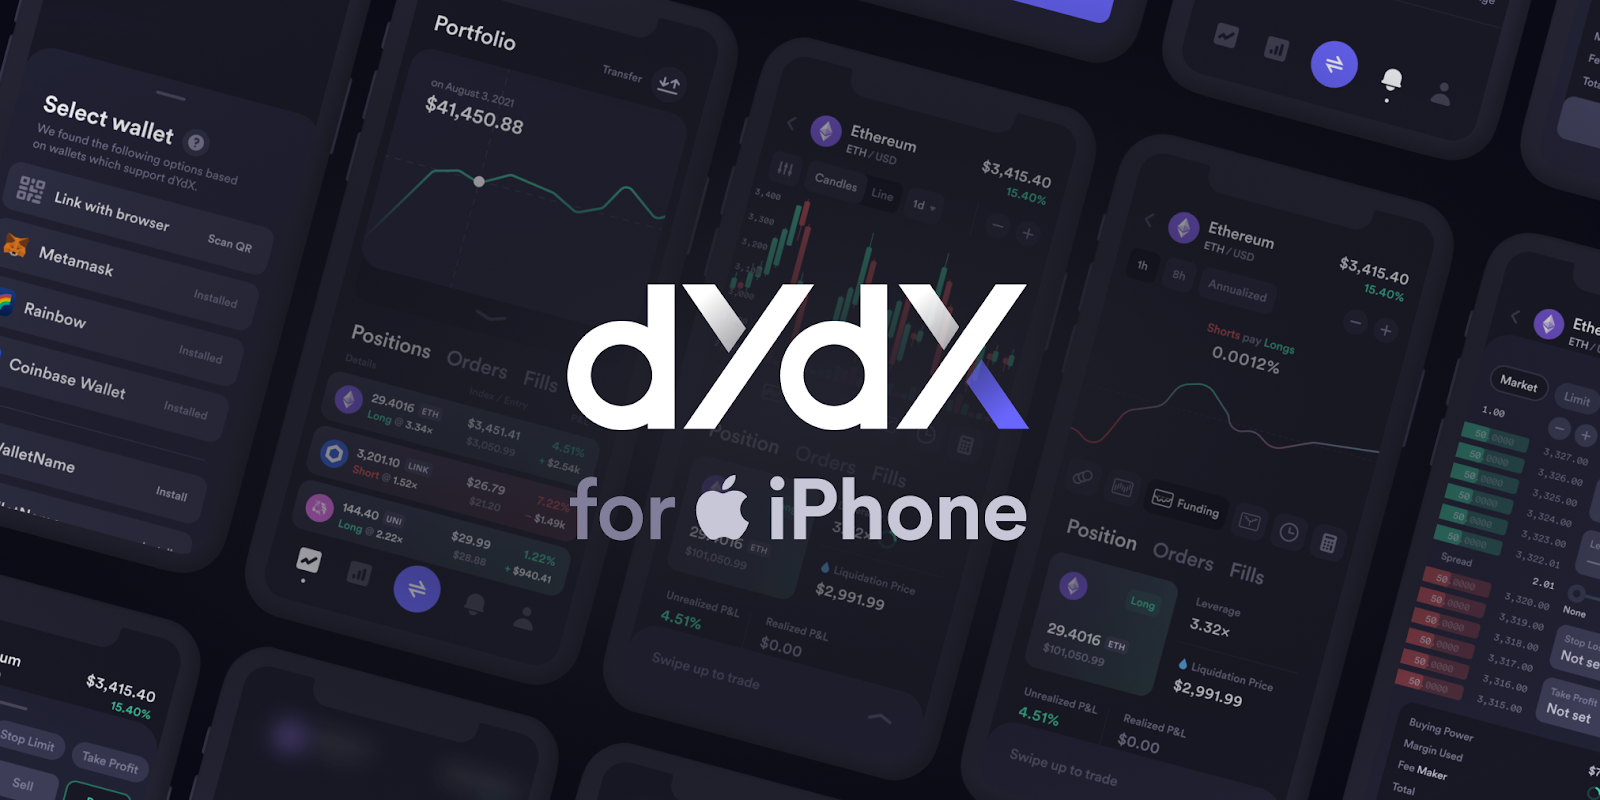 The dYdX application on iOS allows iPhone users to trade and invest on the go, representing an extremely critical service to help the dYdX platform achieve continued adoption moving forward. The dYdX Chain will also launch its Android version in the not-too-distant future. (Image Credit: dYdX for iOS is here via the dYdX blog)